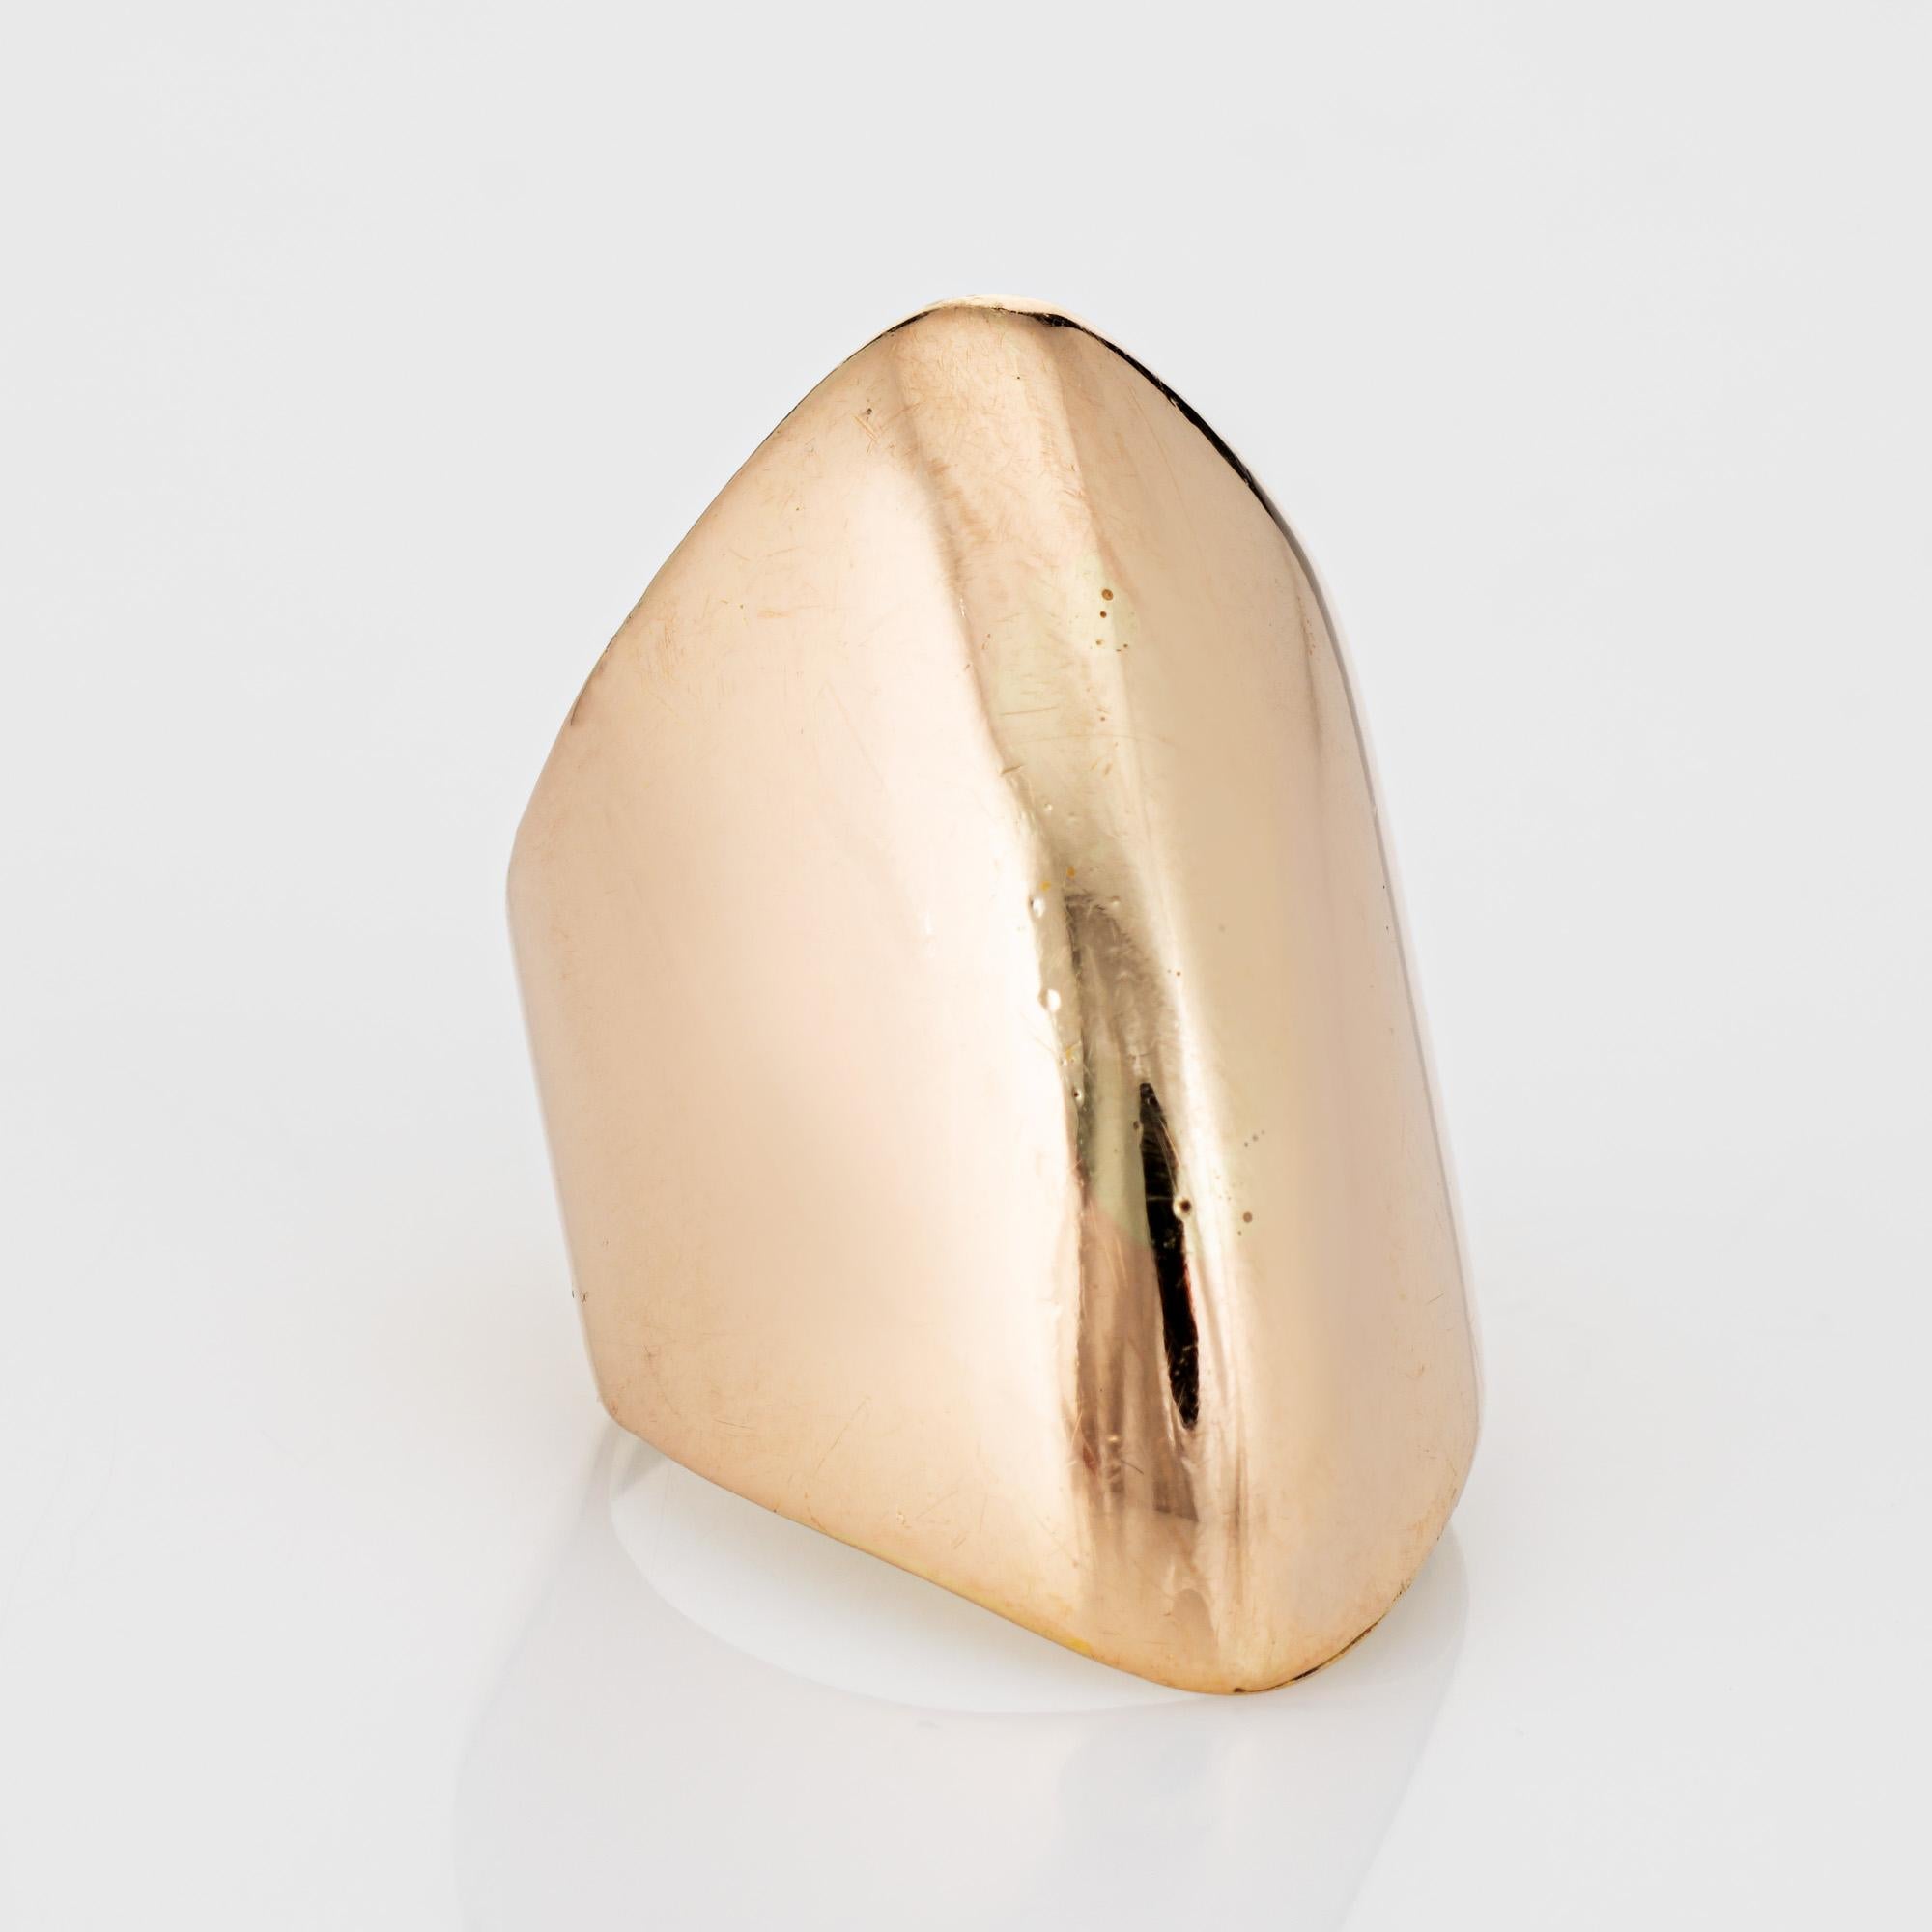 Stylish vintage domed cuff ring (circa 1960s to 1970s) crafted in 14 karat yellow gold. 

The sculptural ring is designed by sought after Danish designer Bent Knudsen. The domed cuff ring is long at 30mm (1.18 inches) in length and makes a great